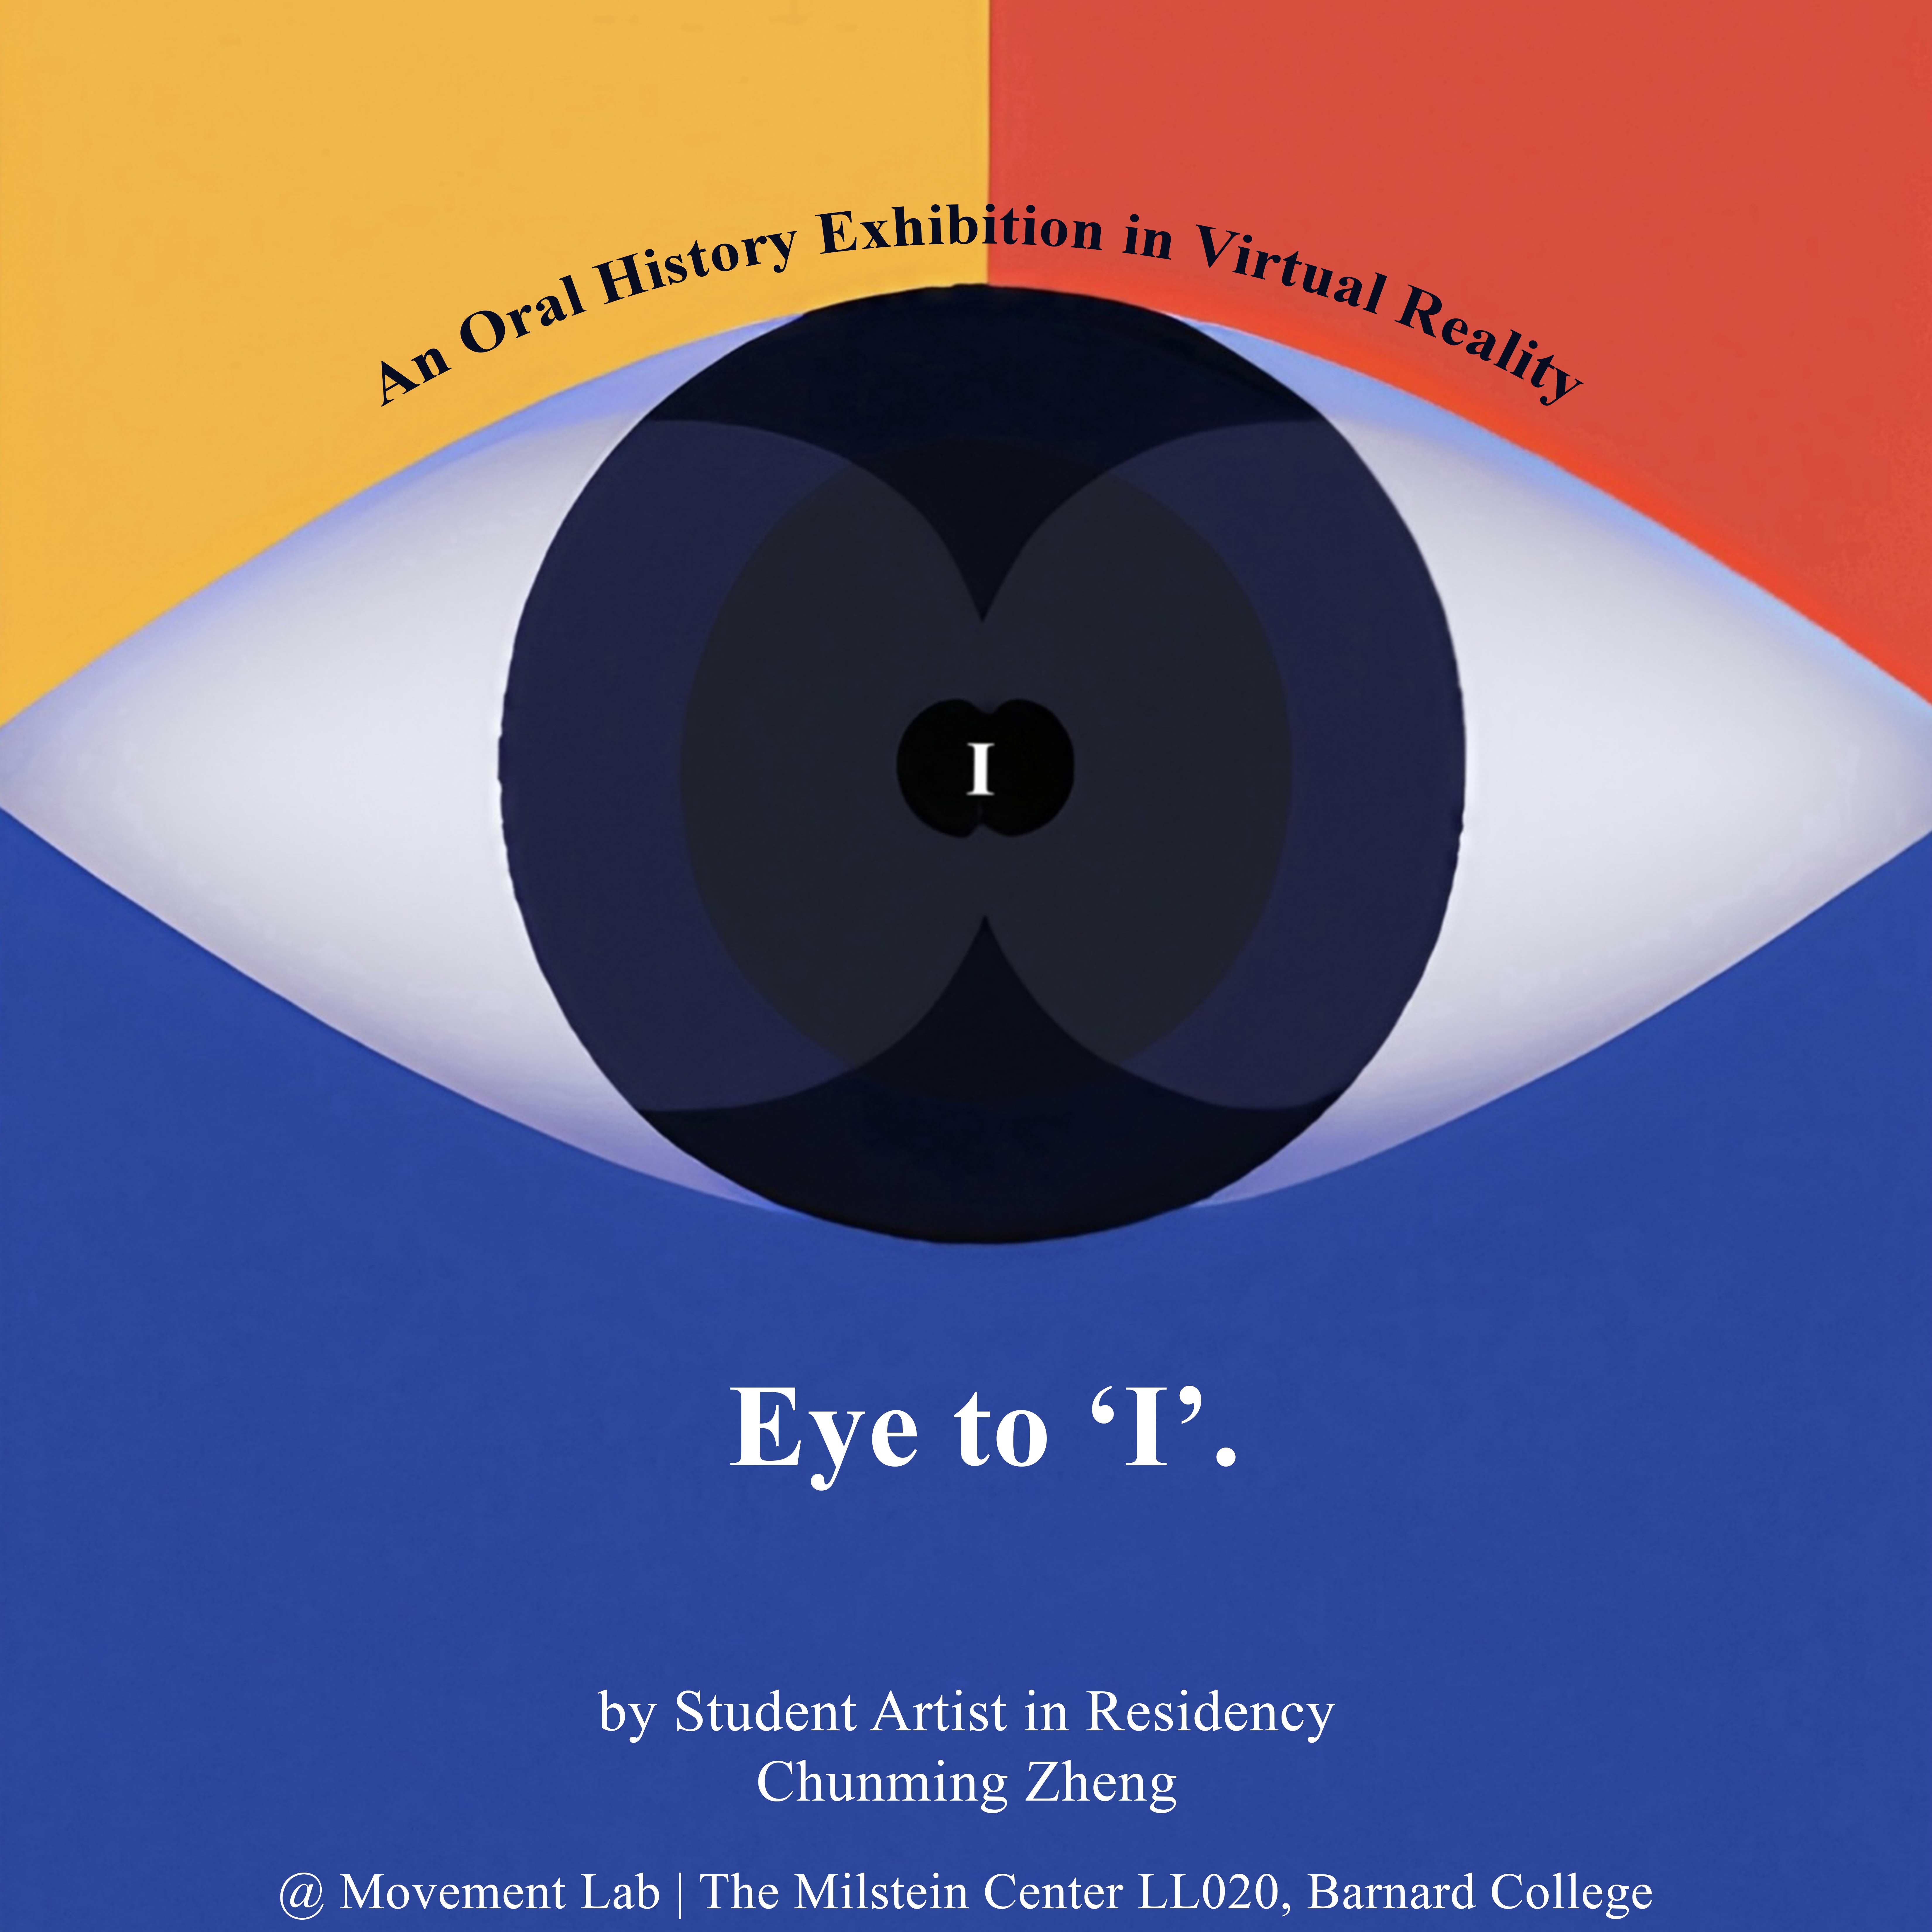 The image features a symbolic eye, set against a saffron, vermillion, and blue background. Above the eye, in the place of the eyelash, a curved text reads This event is a part of Columbia University’s Oral History Master of Arts 2023 Annual Exhibition. The pupil of the eye contains a small capitalized letter 'I', which symbolizes the connection to one's inner self. Below the eye, the title of the exhibition Eye to 'I'. is displayed, signifying the homophonic duality of the eye as an organ of sight and the 'I' representing oneself. Followed by a one-line description: An Oral History Exhibition in Virtual Reality.